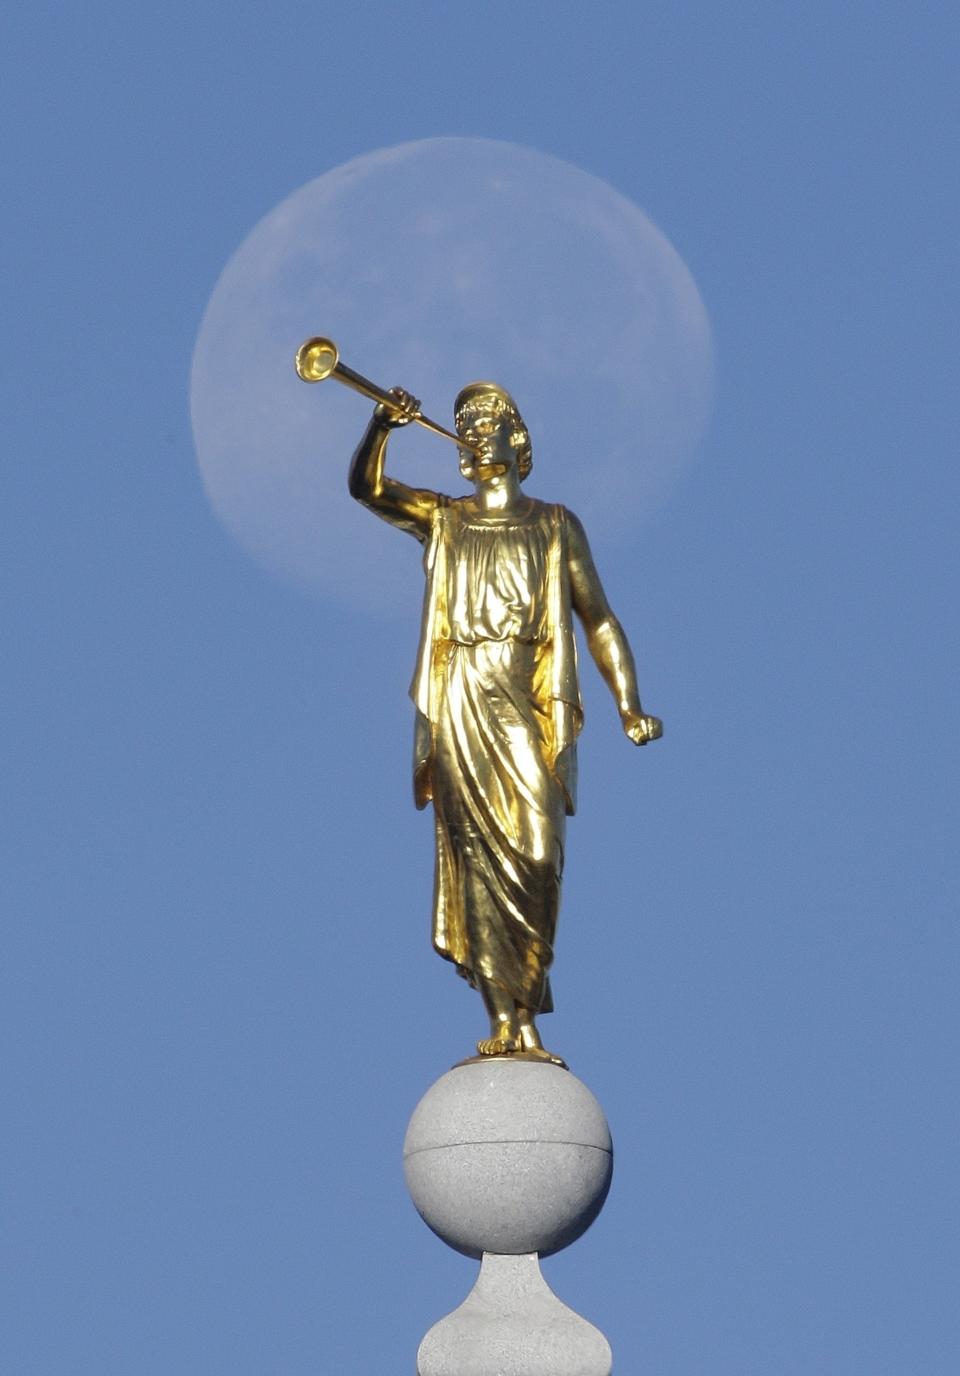 FILE - The angel Moroni statue sits atop the Salt Lake Temple of The Church of Jesus Christ of Latter-day Saints at Temple Square on Sept. 11, 2014, in Salt Lake City. The Church of Jesus Christ of Latter-day Saints on Tuesday, Nov. 15, 2022, came out in support of The Respect for Marriage Act under consideration in Congress after years of opposing recognition of same-sex marriage. (AP Photo/Rick Bowmer, File)